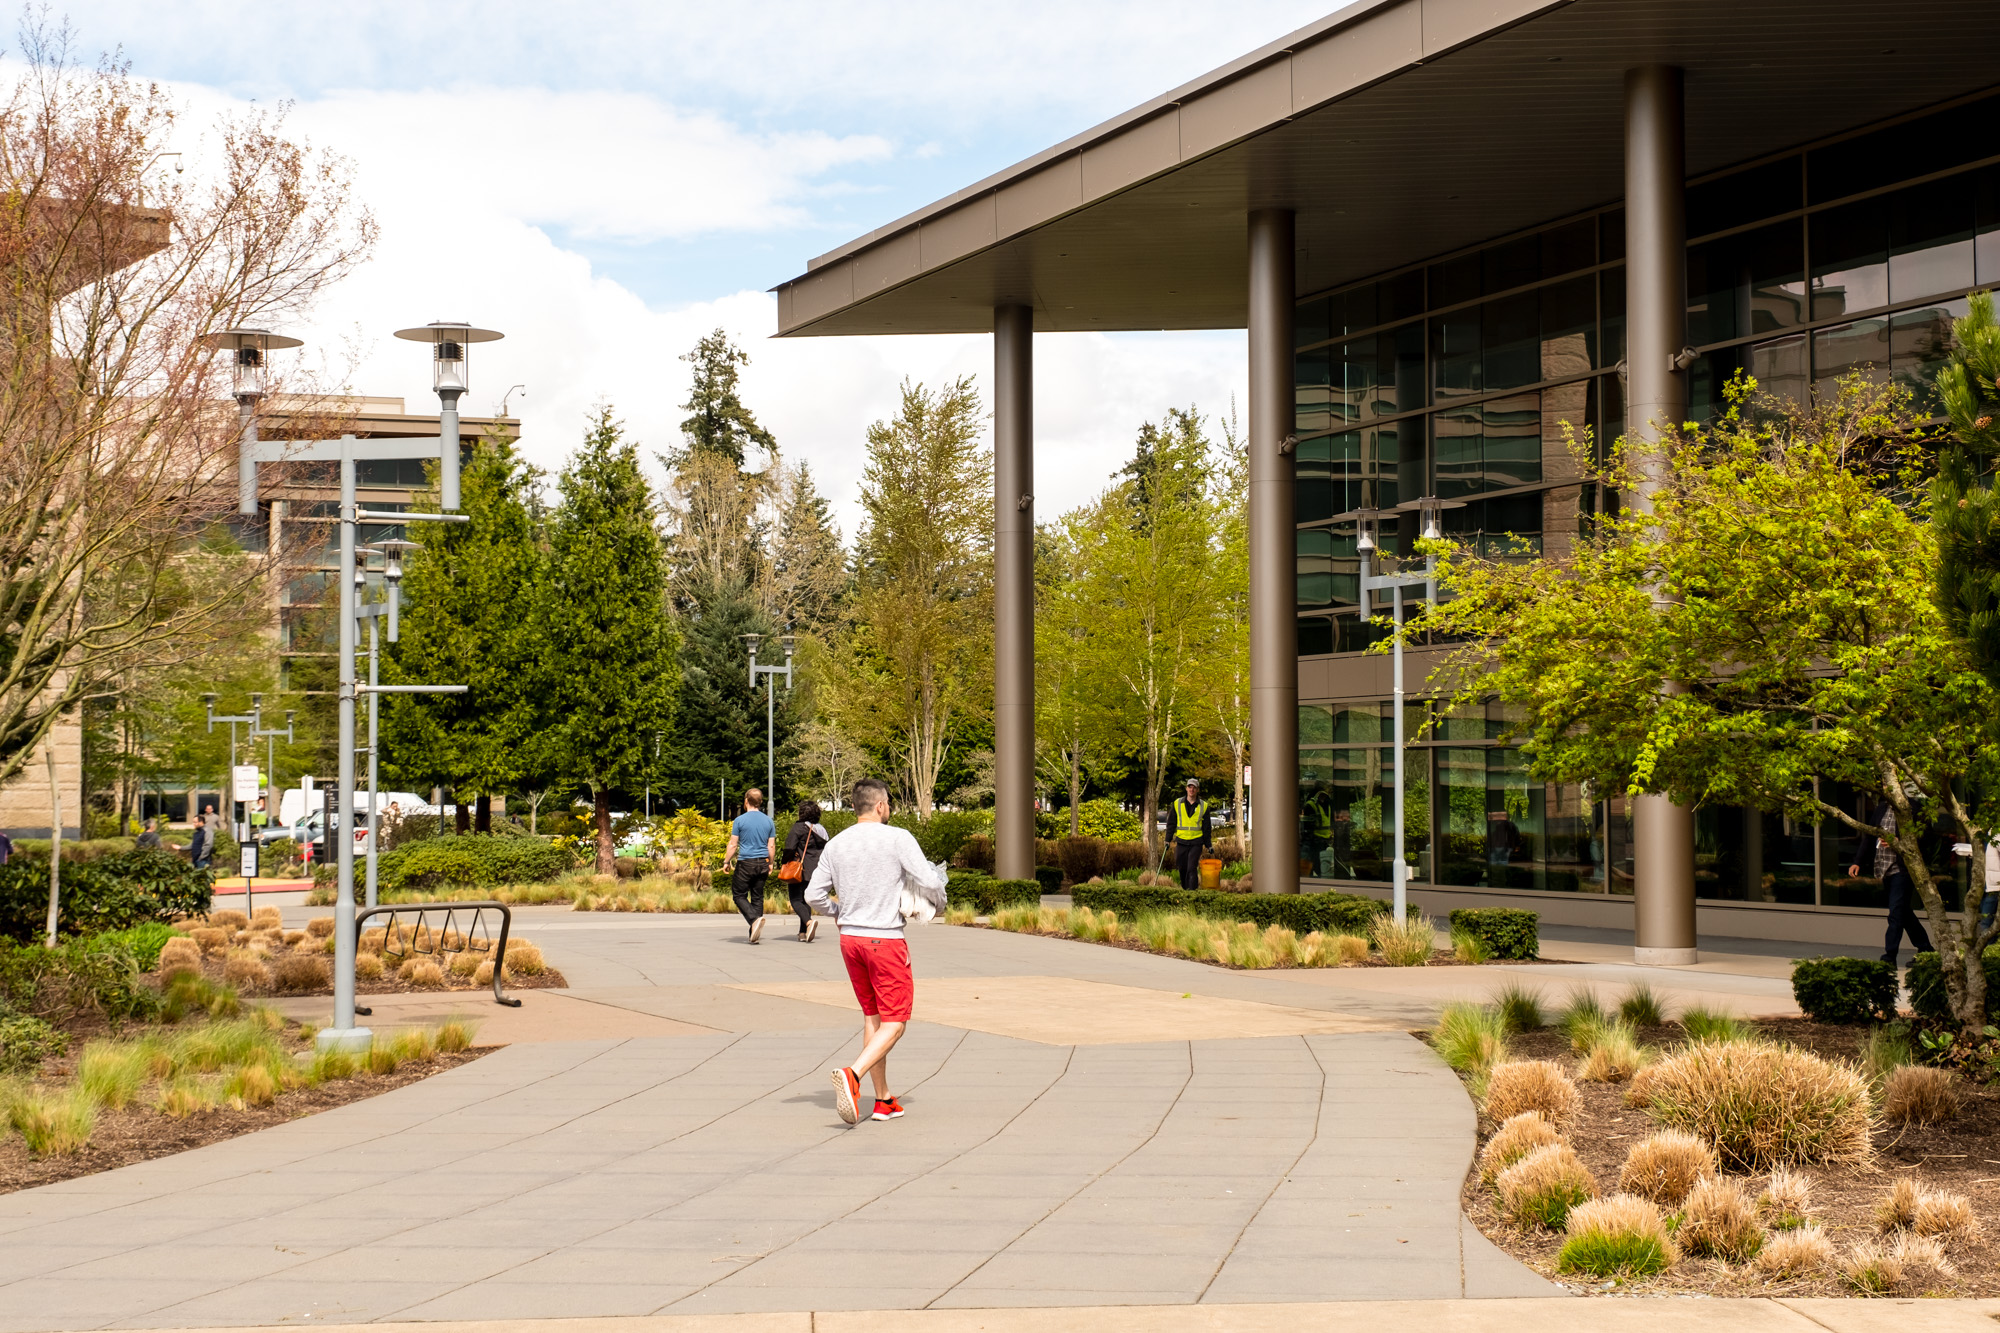 Microsoft Campus - this is what Redmond looks like